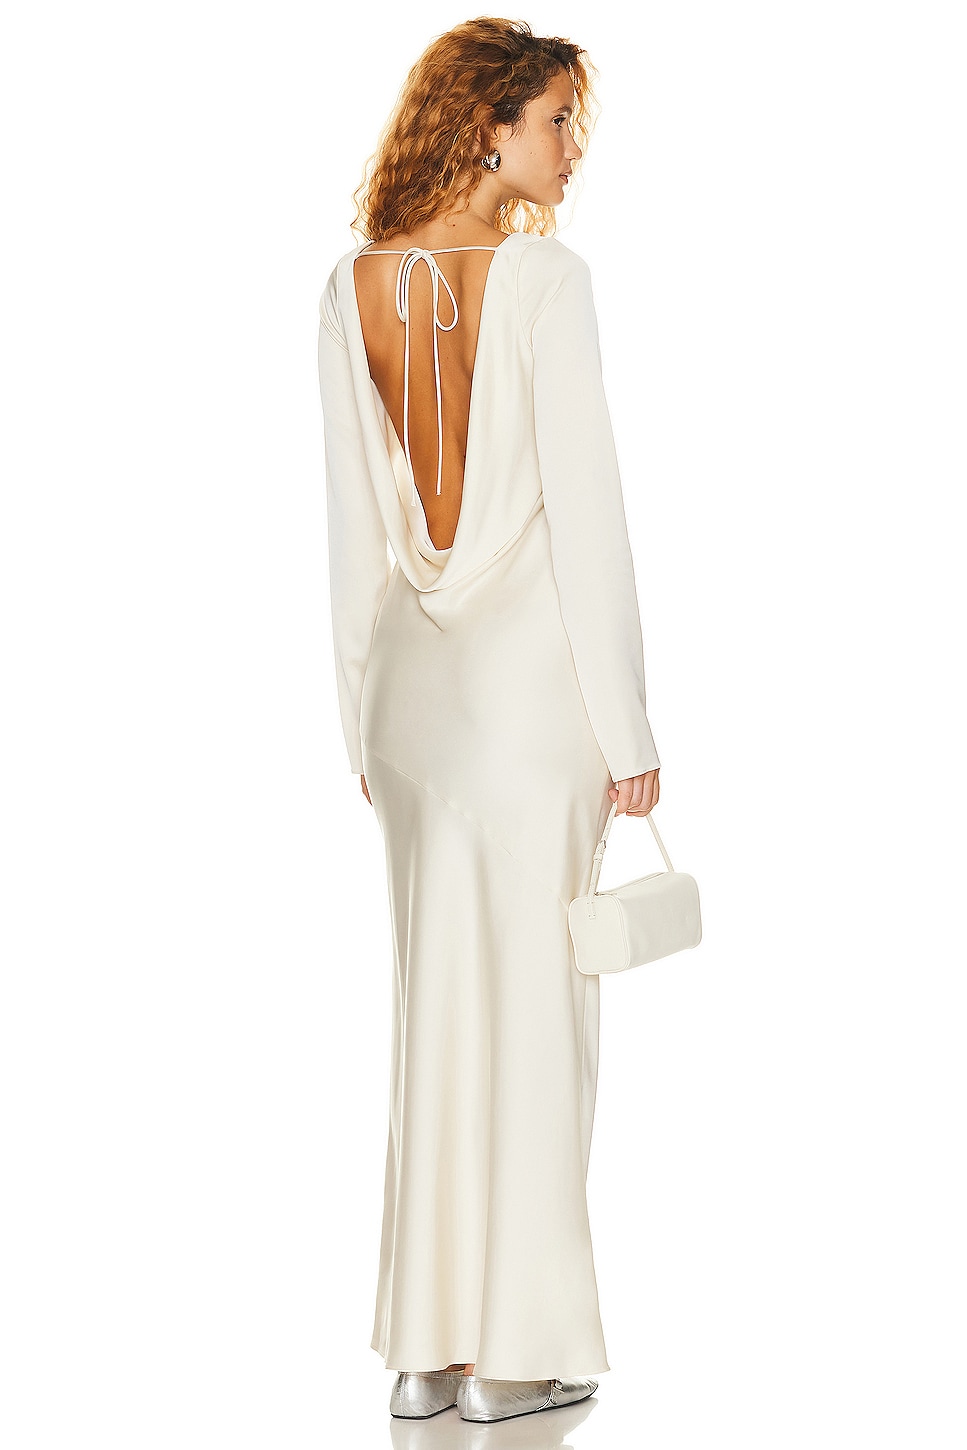 Image 1 of Helsa Angelica Backless Maxi Dress in Ivory